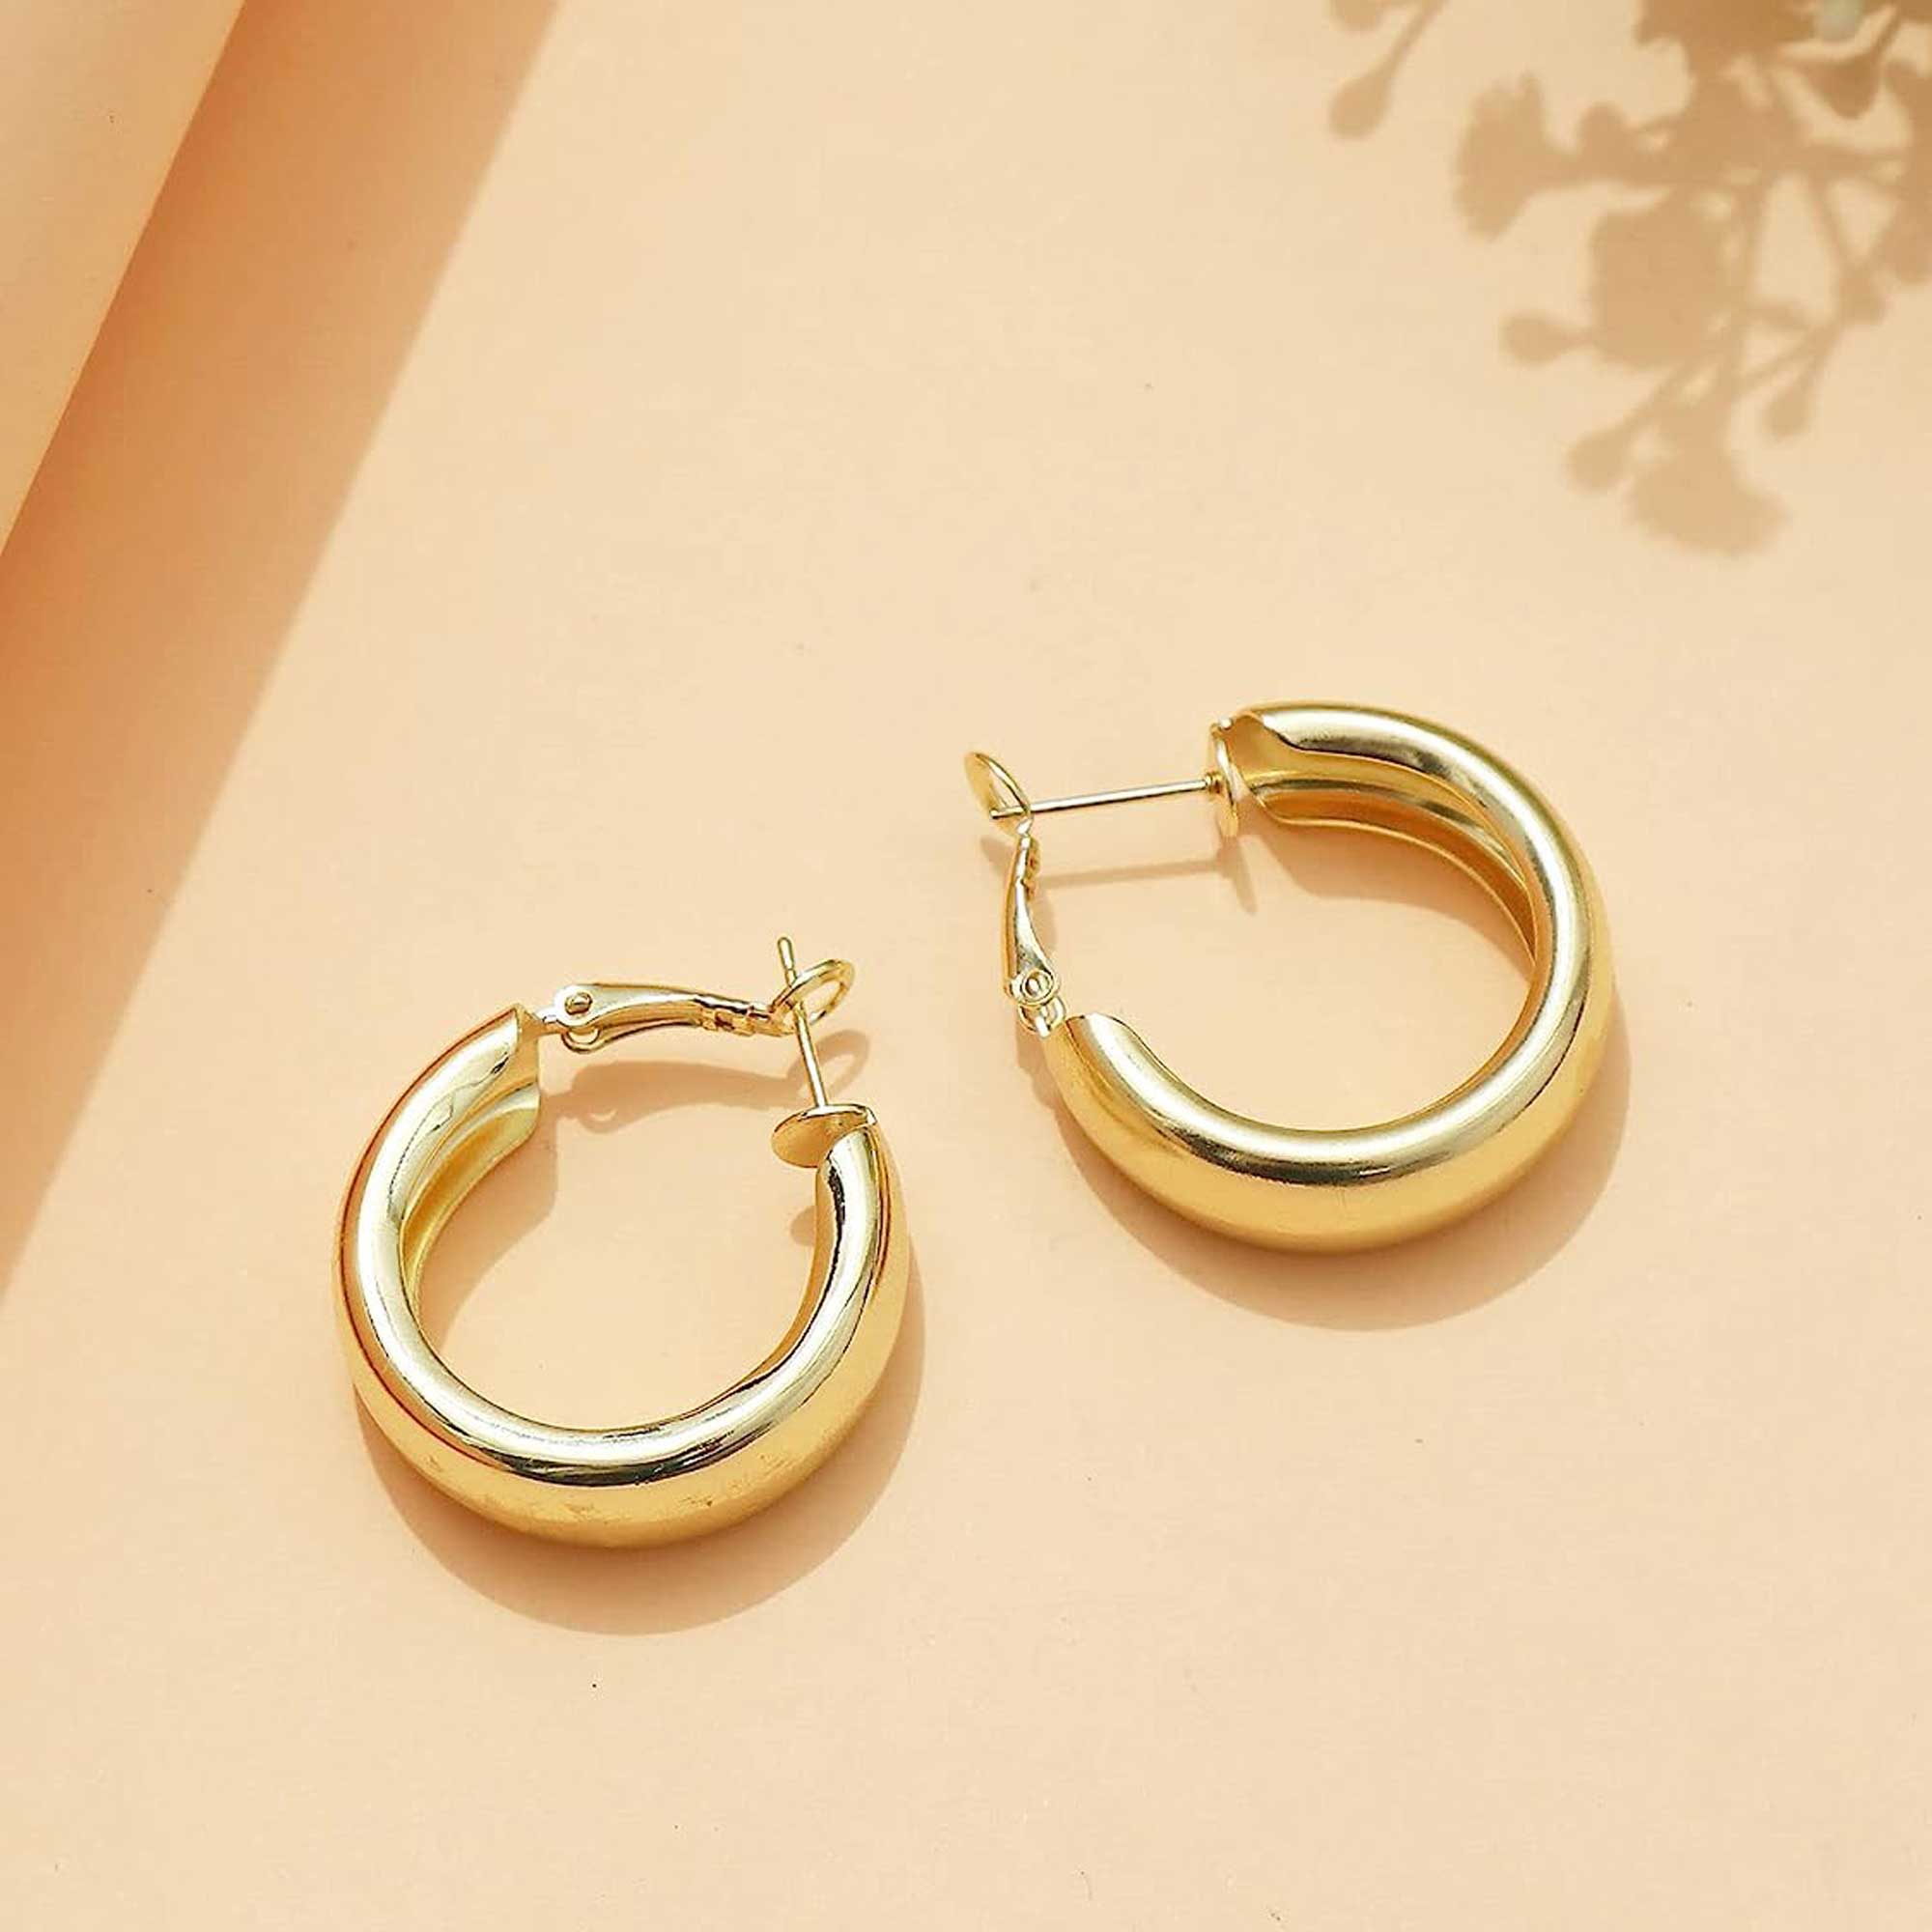 Double Hoop Earrings - Harley | Ana Luisa | Online Jewelry Store At Prices  You'll Love